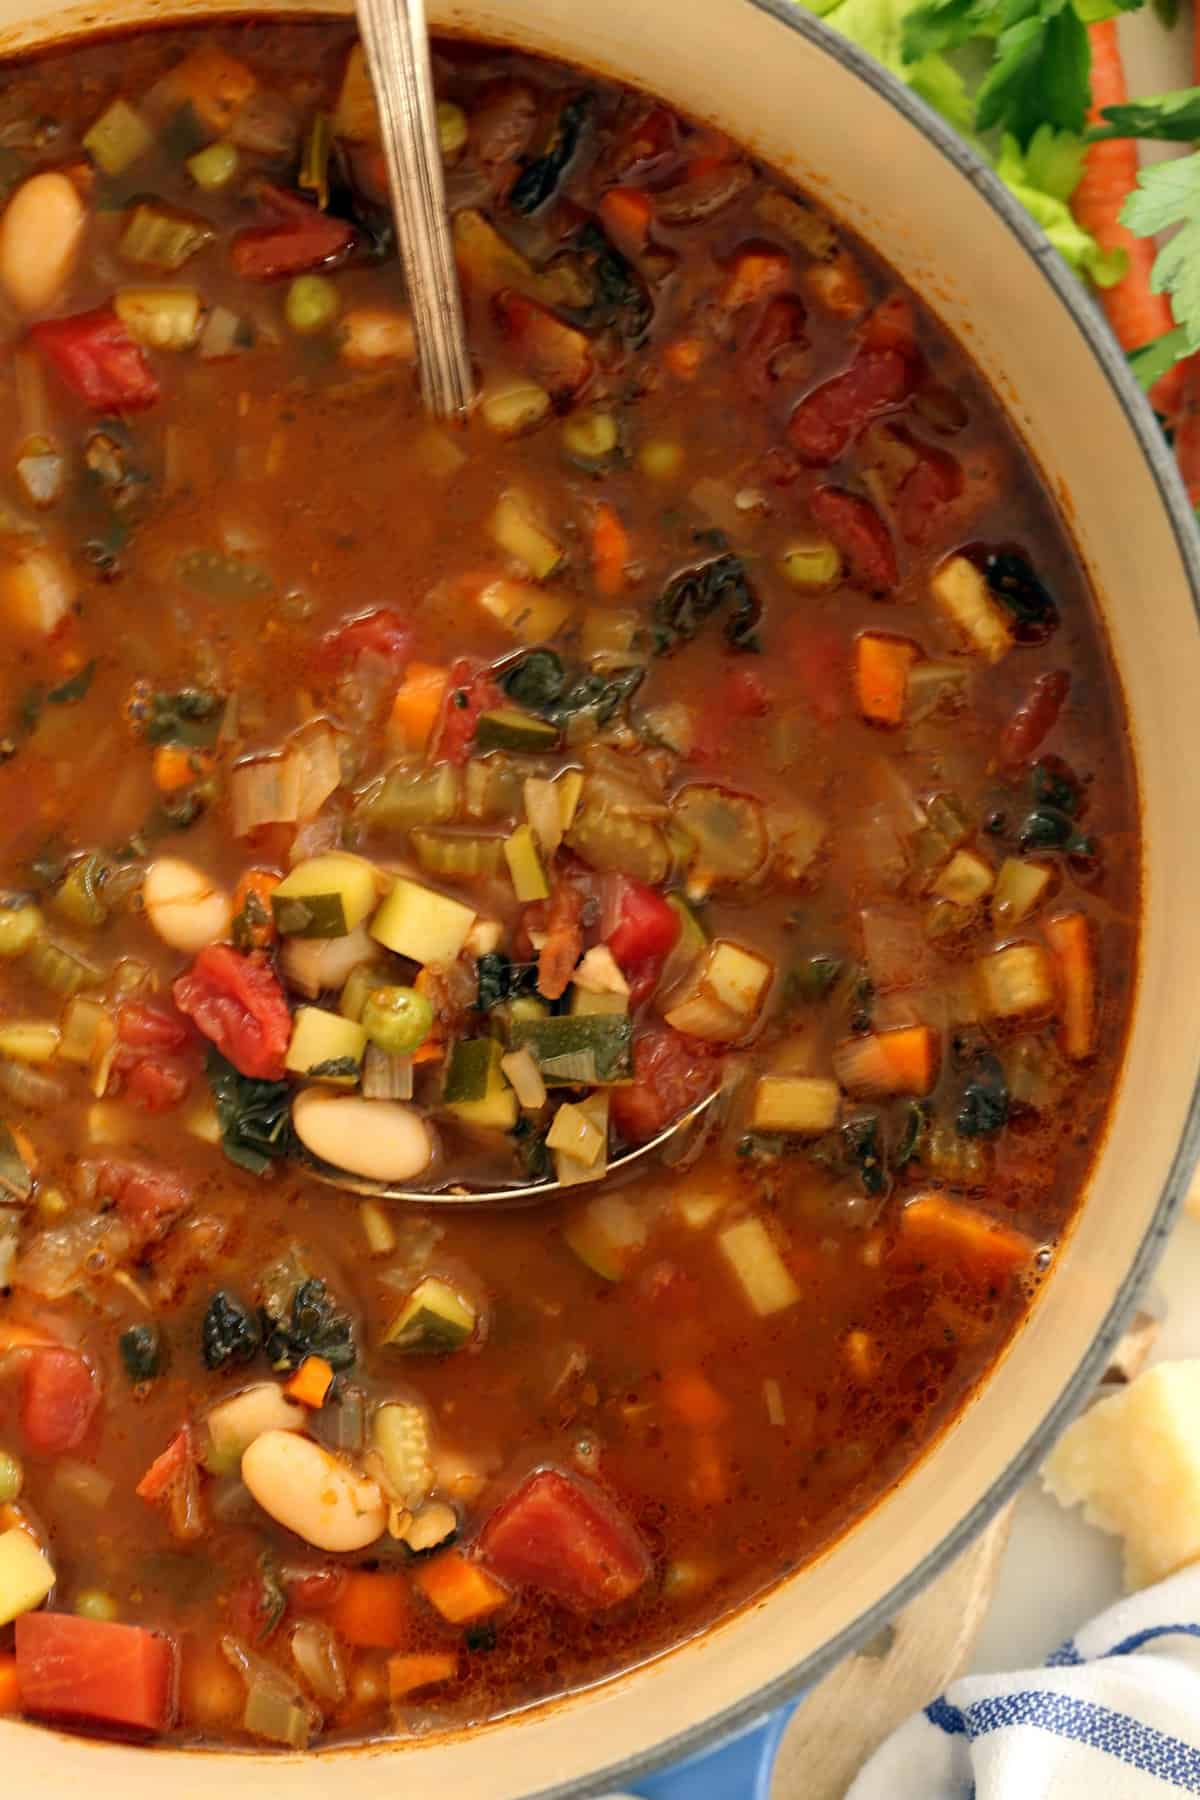 Easy Minestrone Soup Recipe - The Harvest Kitchen